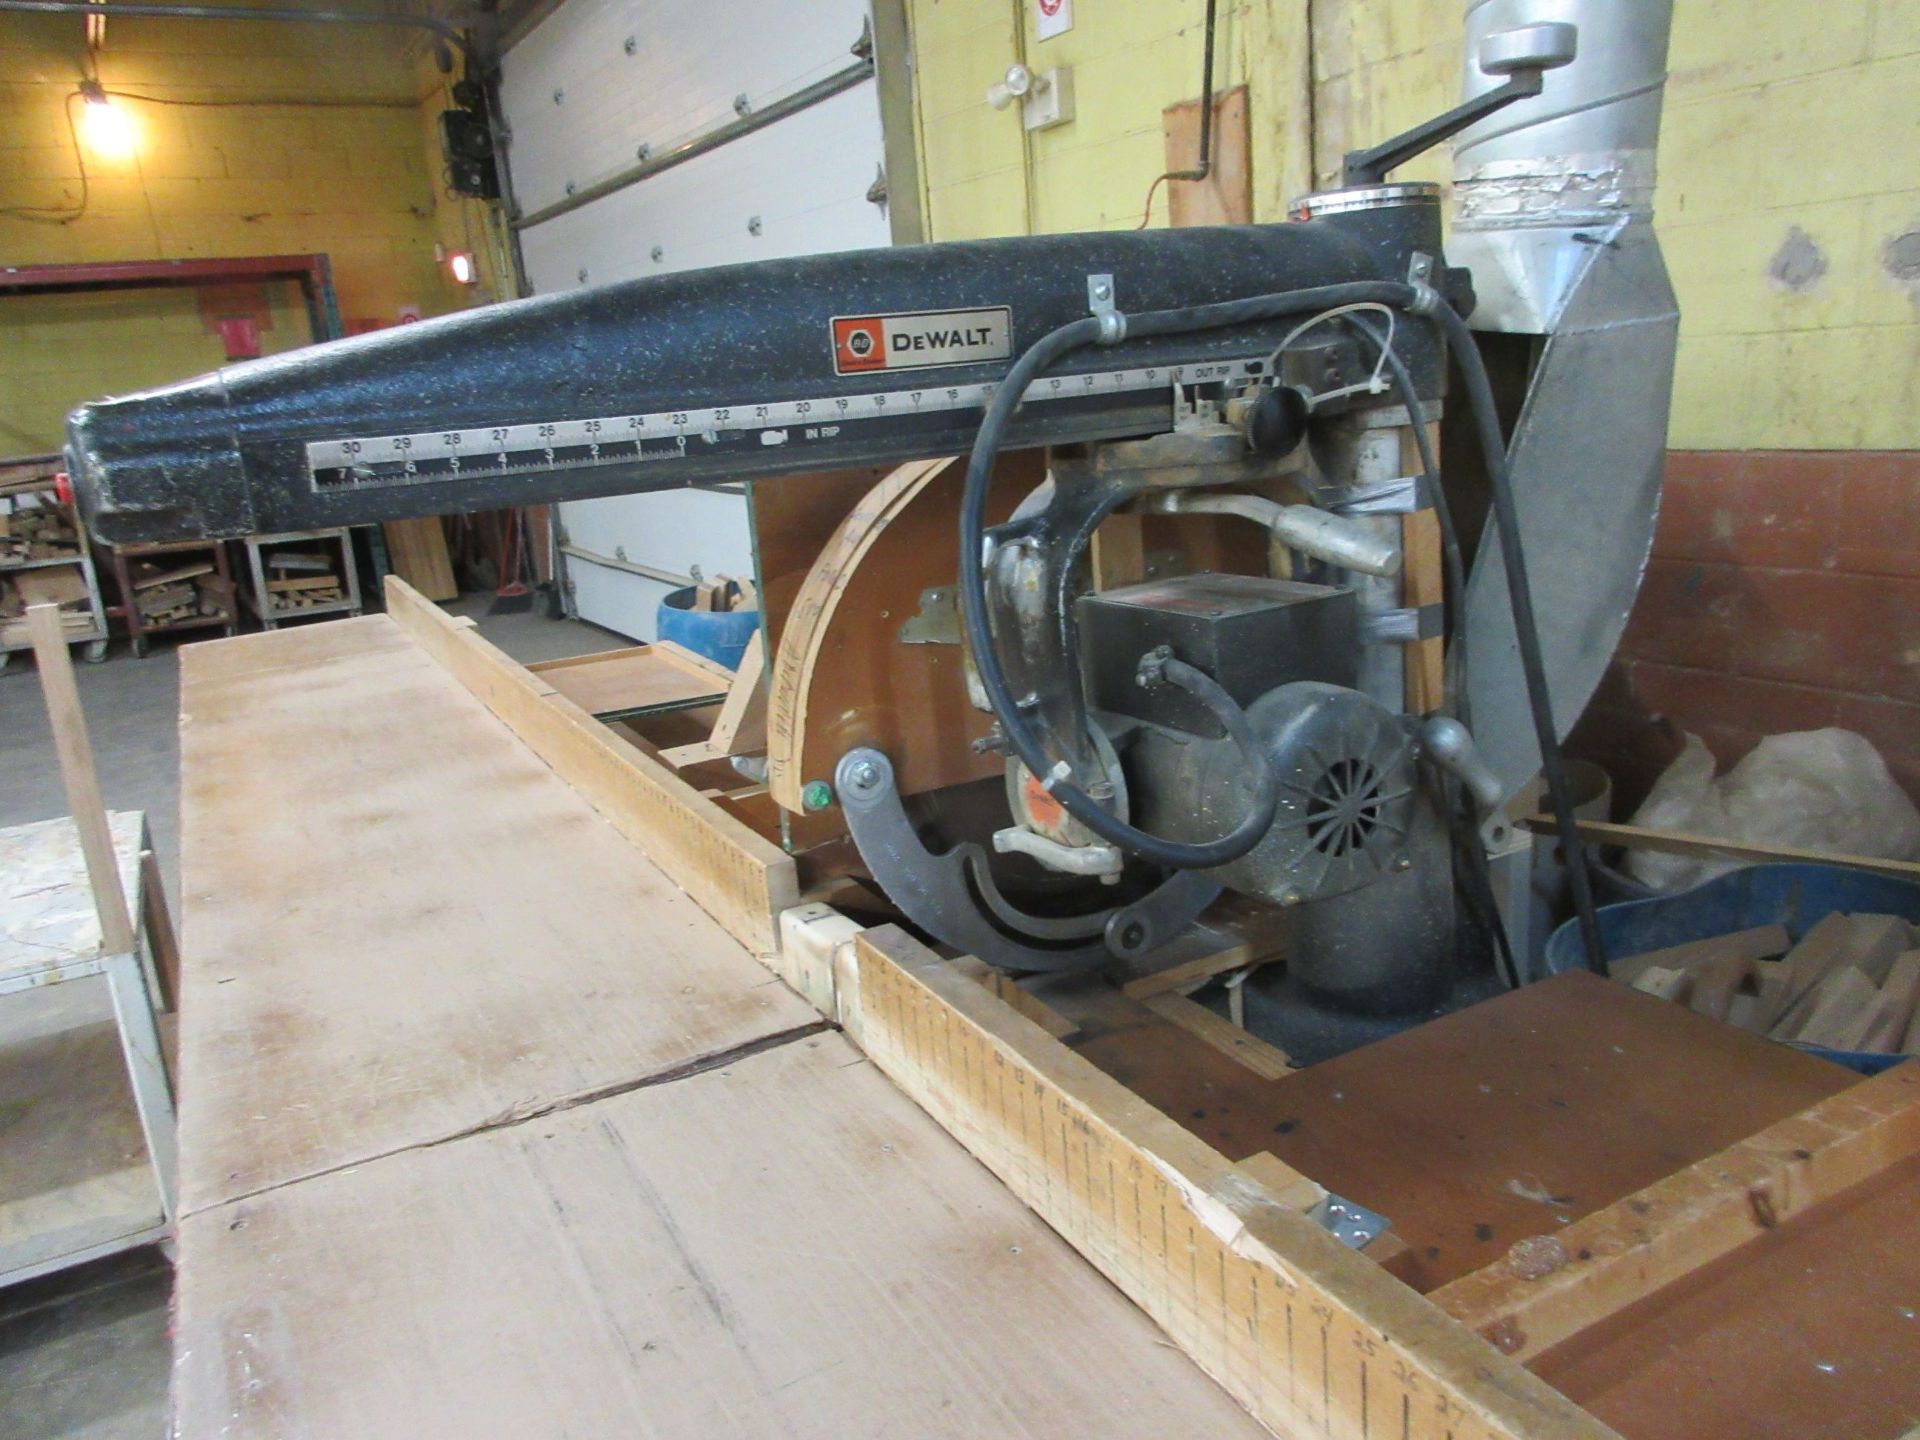 DEWALT radial saw 16" Mod: 3526-02, 600 volts (SUBJECT TO BANK APPROVAL) - Image 3 of 3